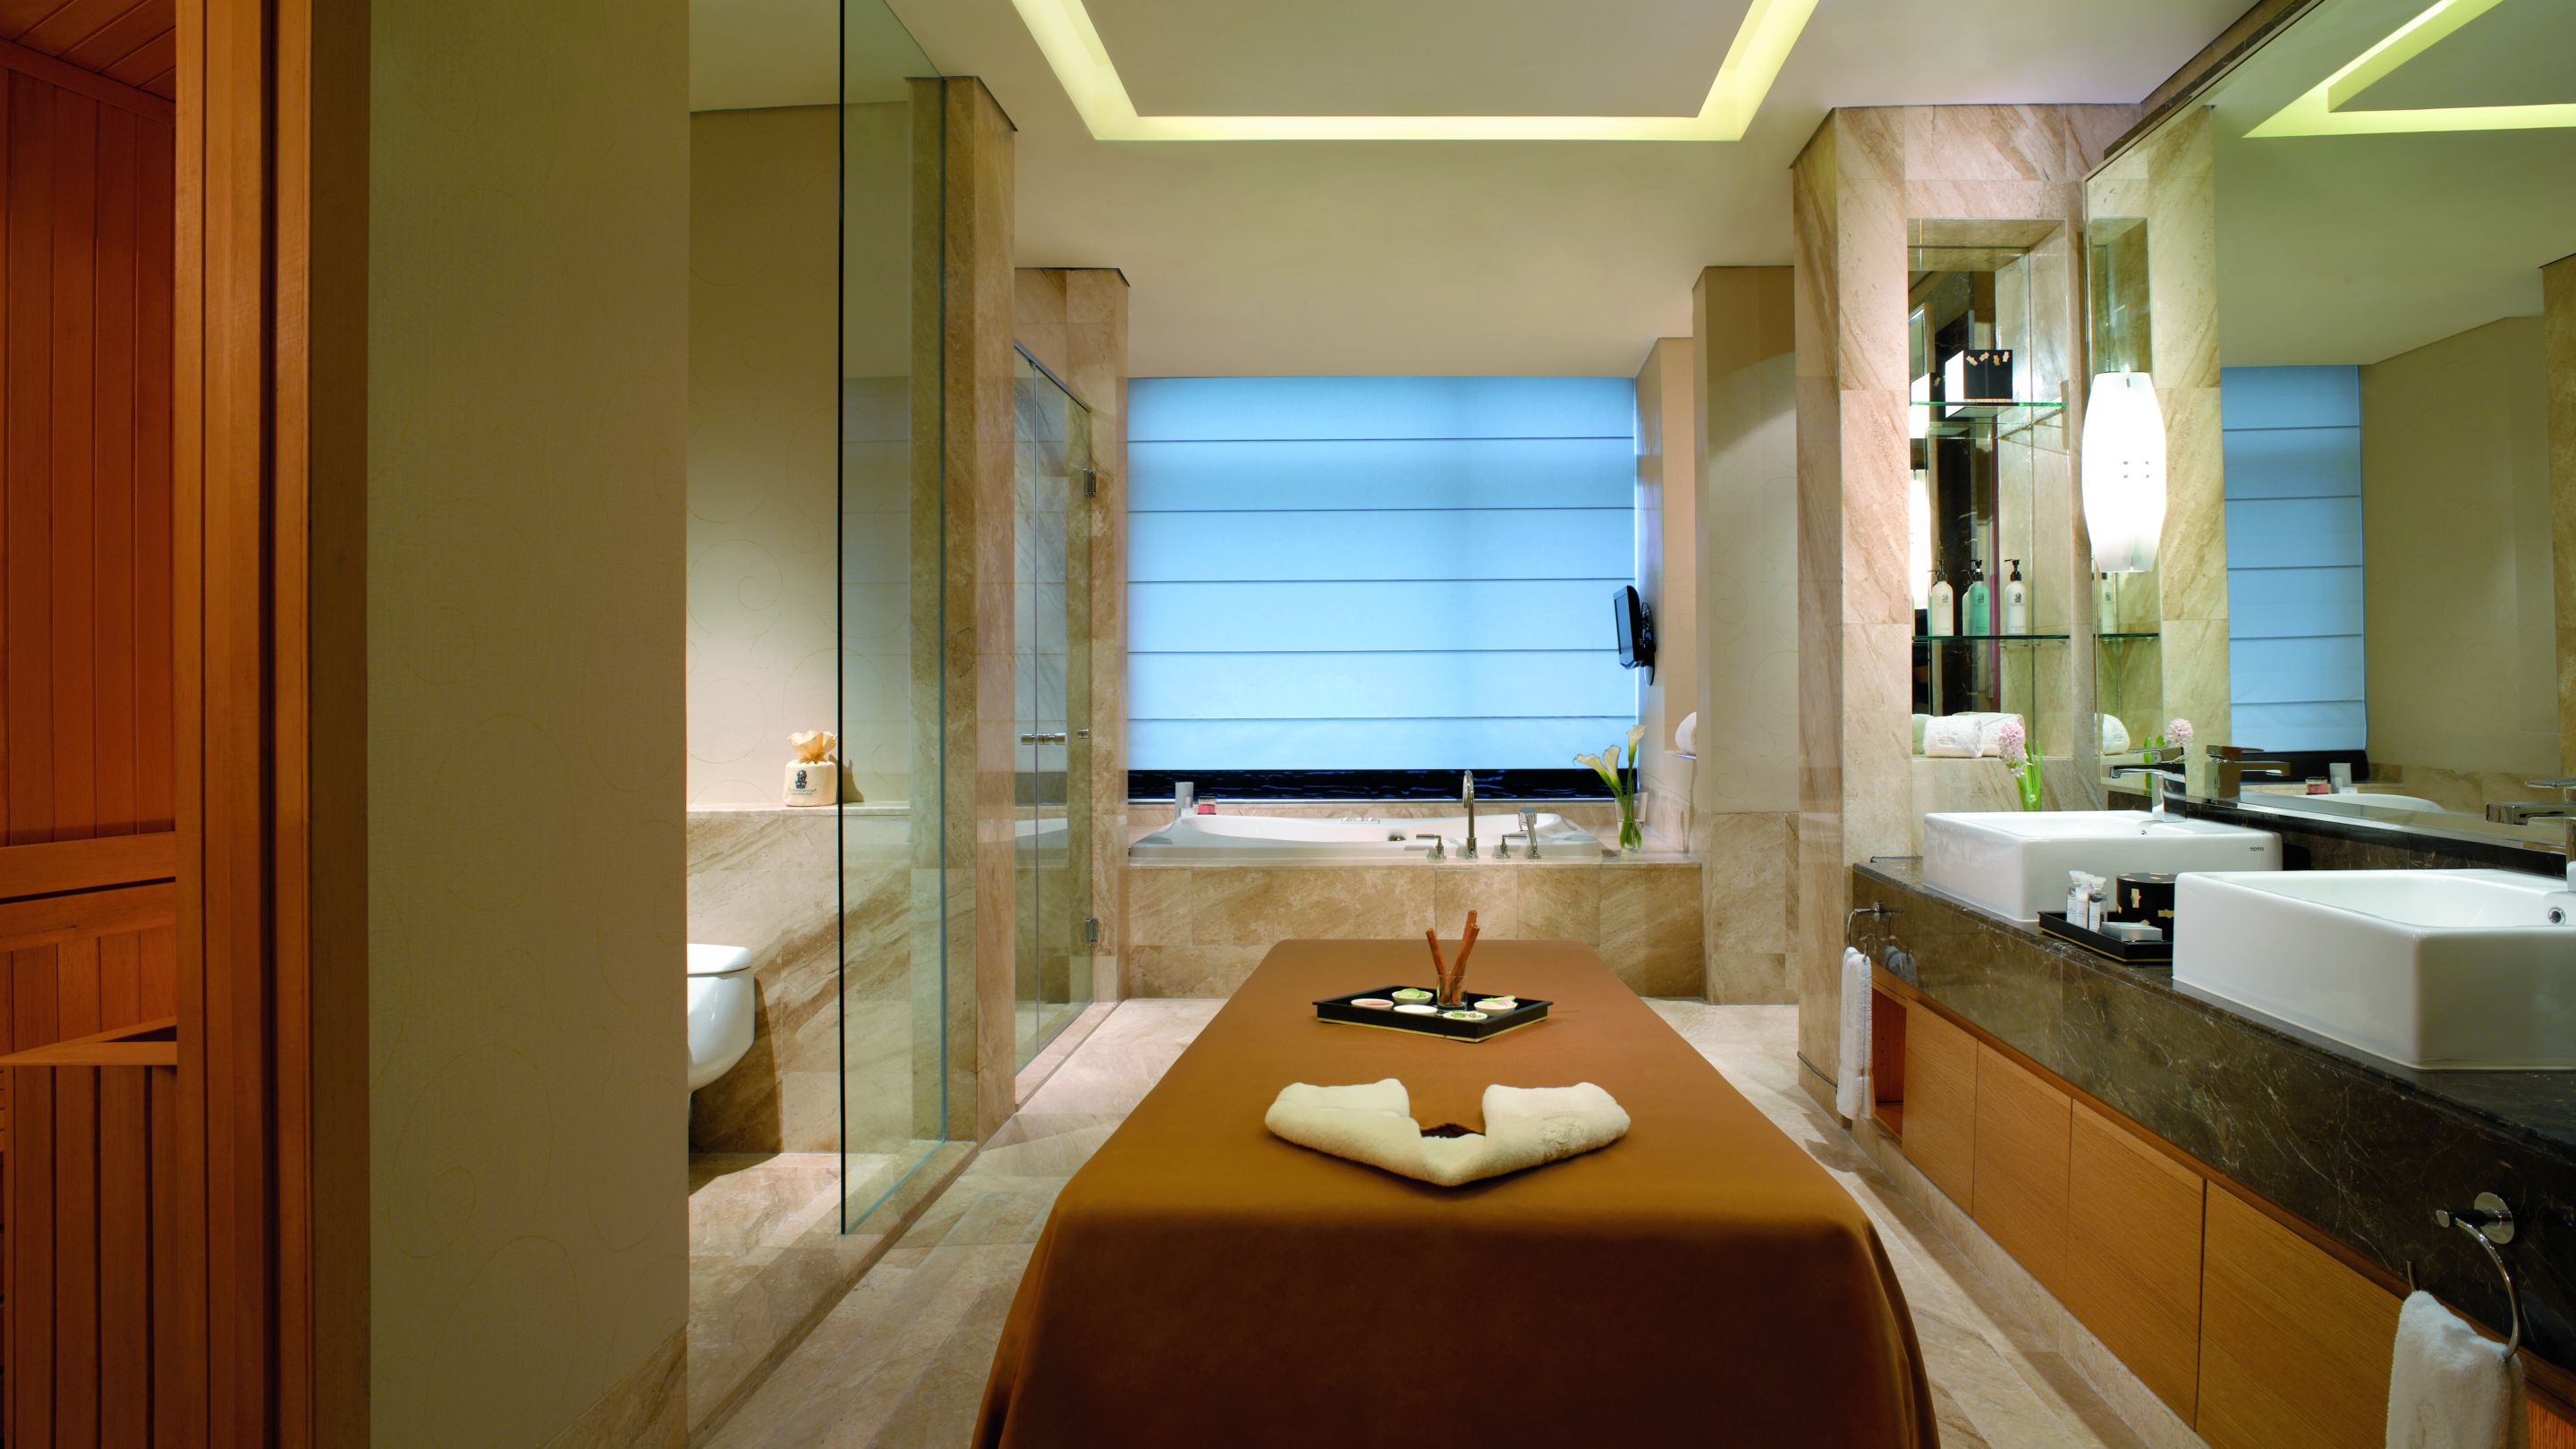 Massage table in the middle of a marble bathroom with a double vanity, glass-enclosed shower and large tub